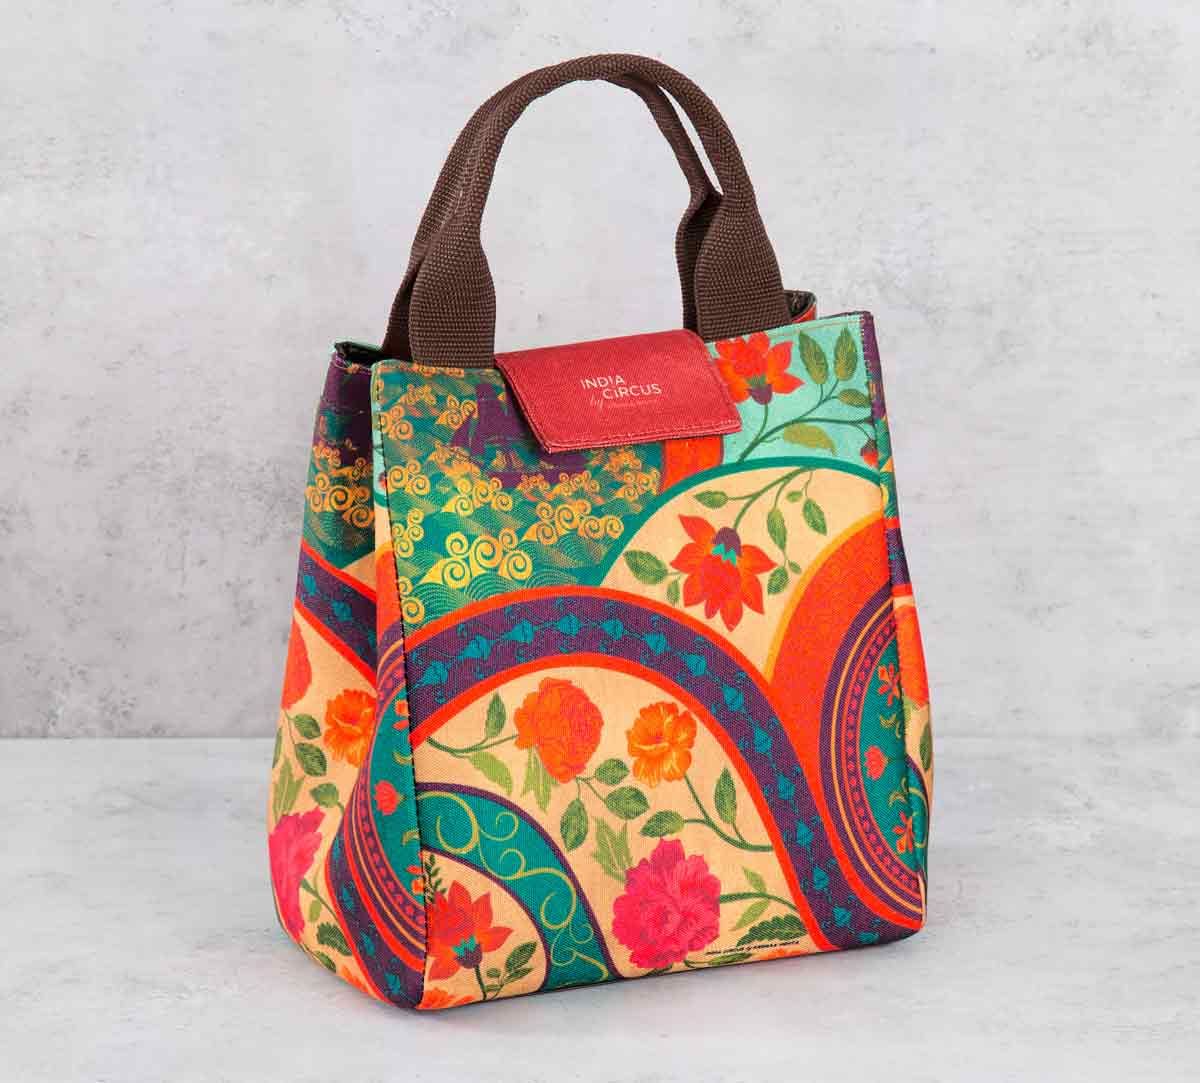 Affordable stylish tiffin bags for women - indiacircus.com